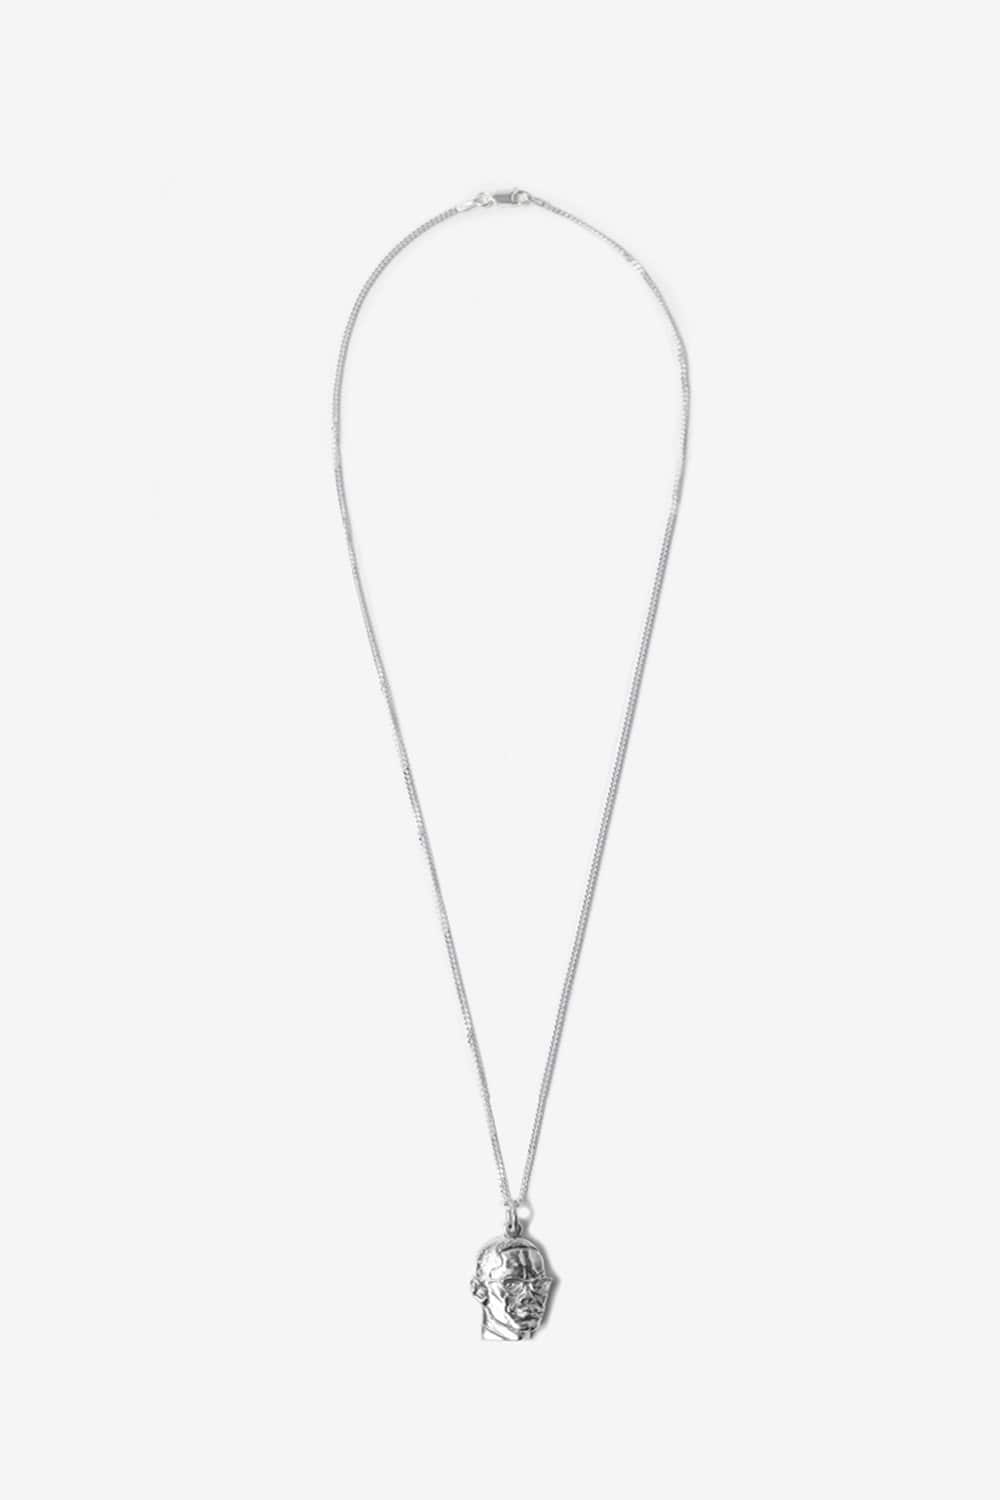 Commonwealth Malcolm Necklace (Silver)